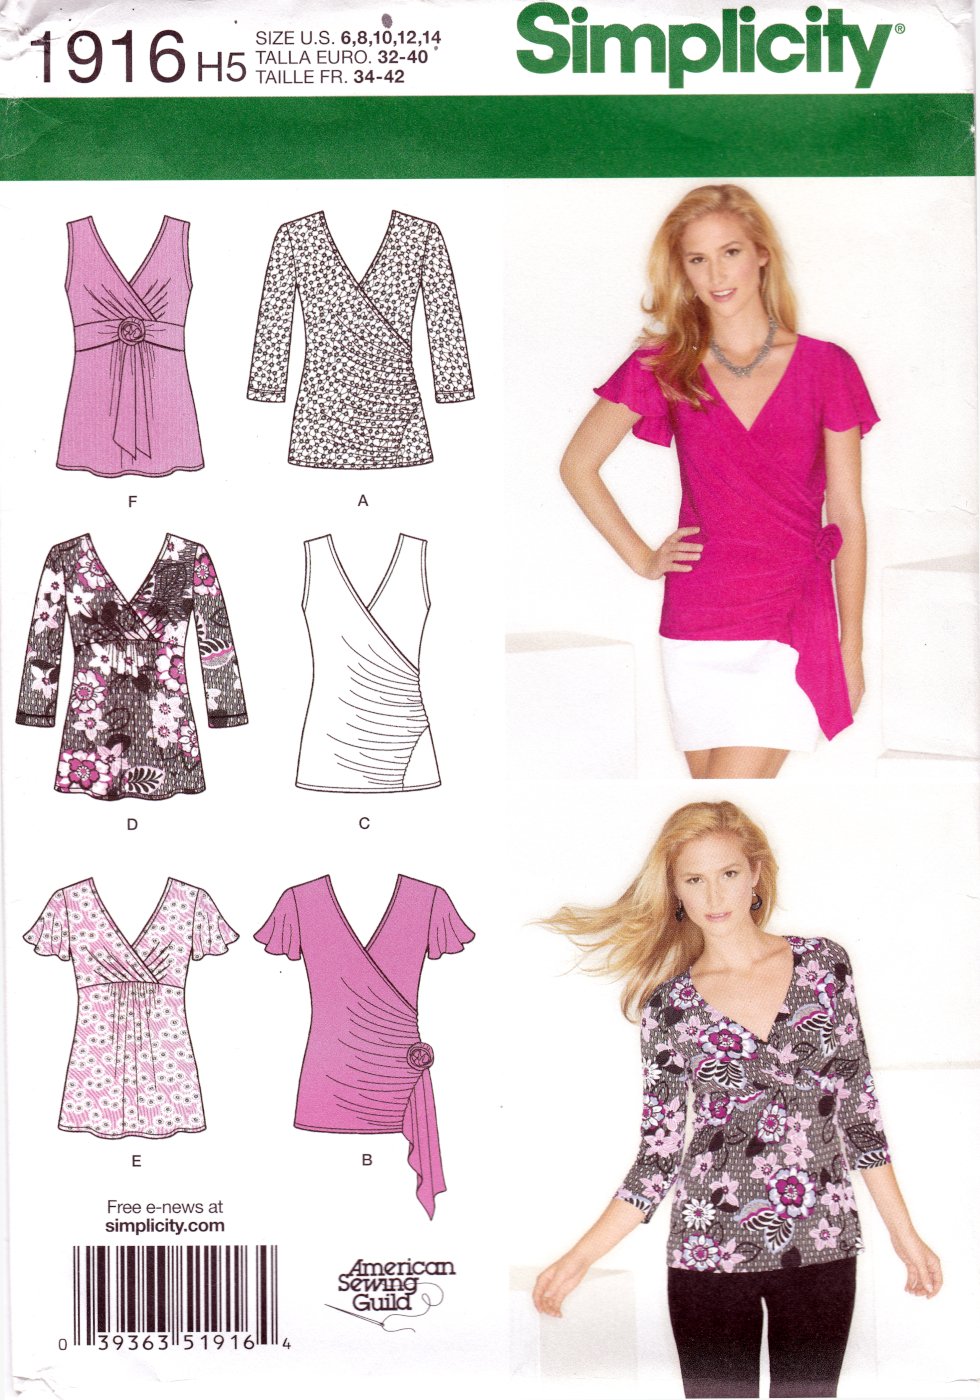 Simplicity 1916 Misses Stretch Knit Tops Style Variations Sewing Pattern Sizes 6-8-10-12-14